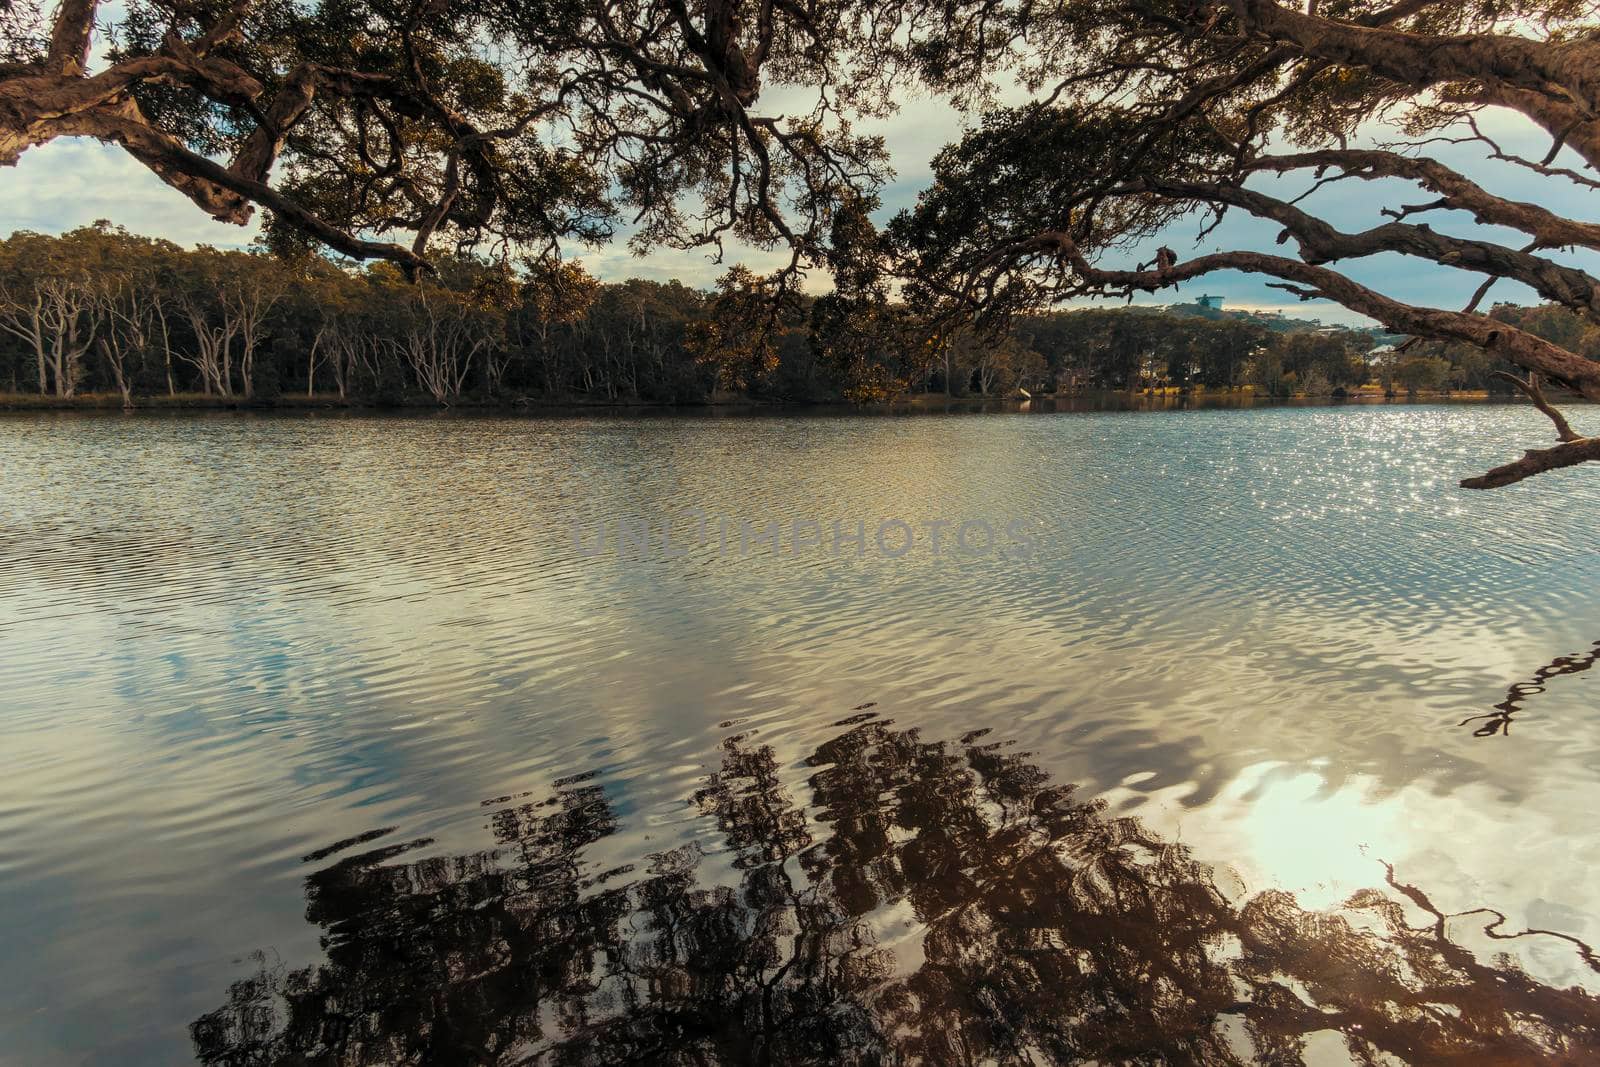 Photograph of the water and trees at Avoca Lagoon on the Central Coast in New South Wales in Australia